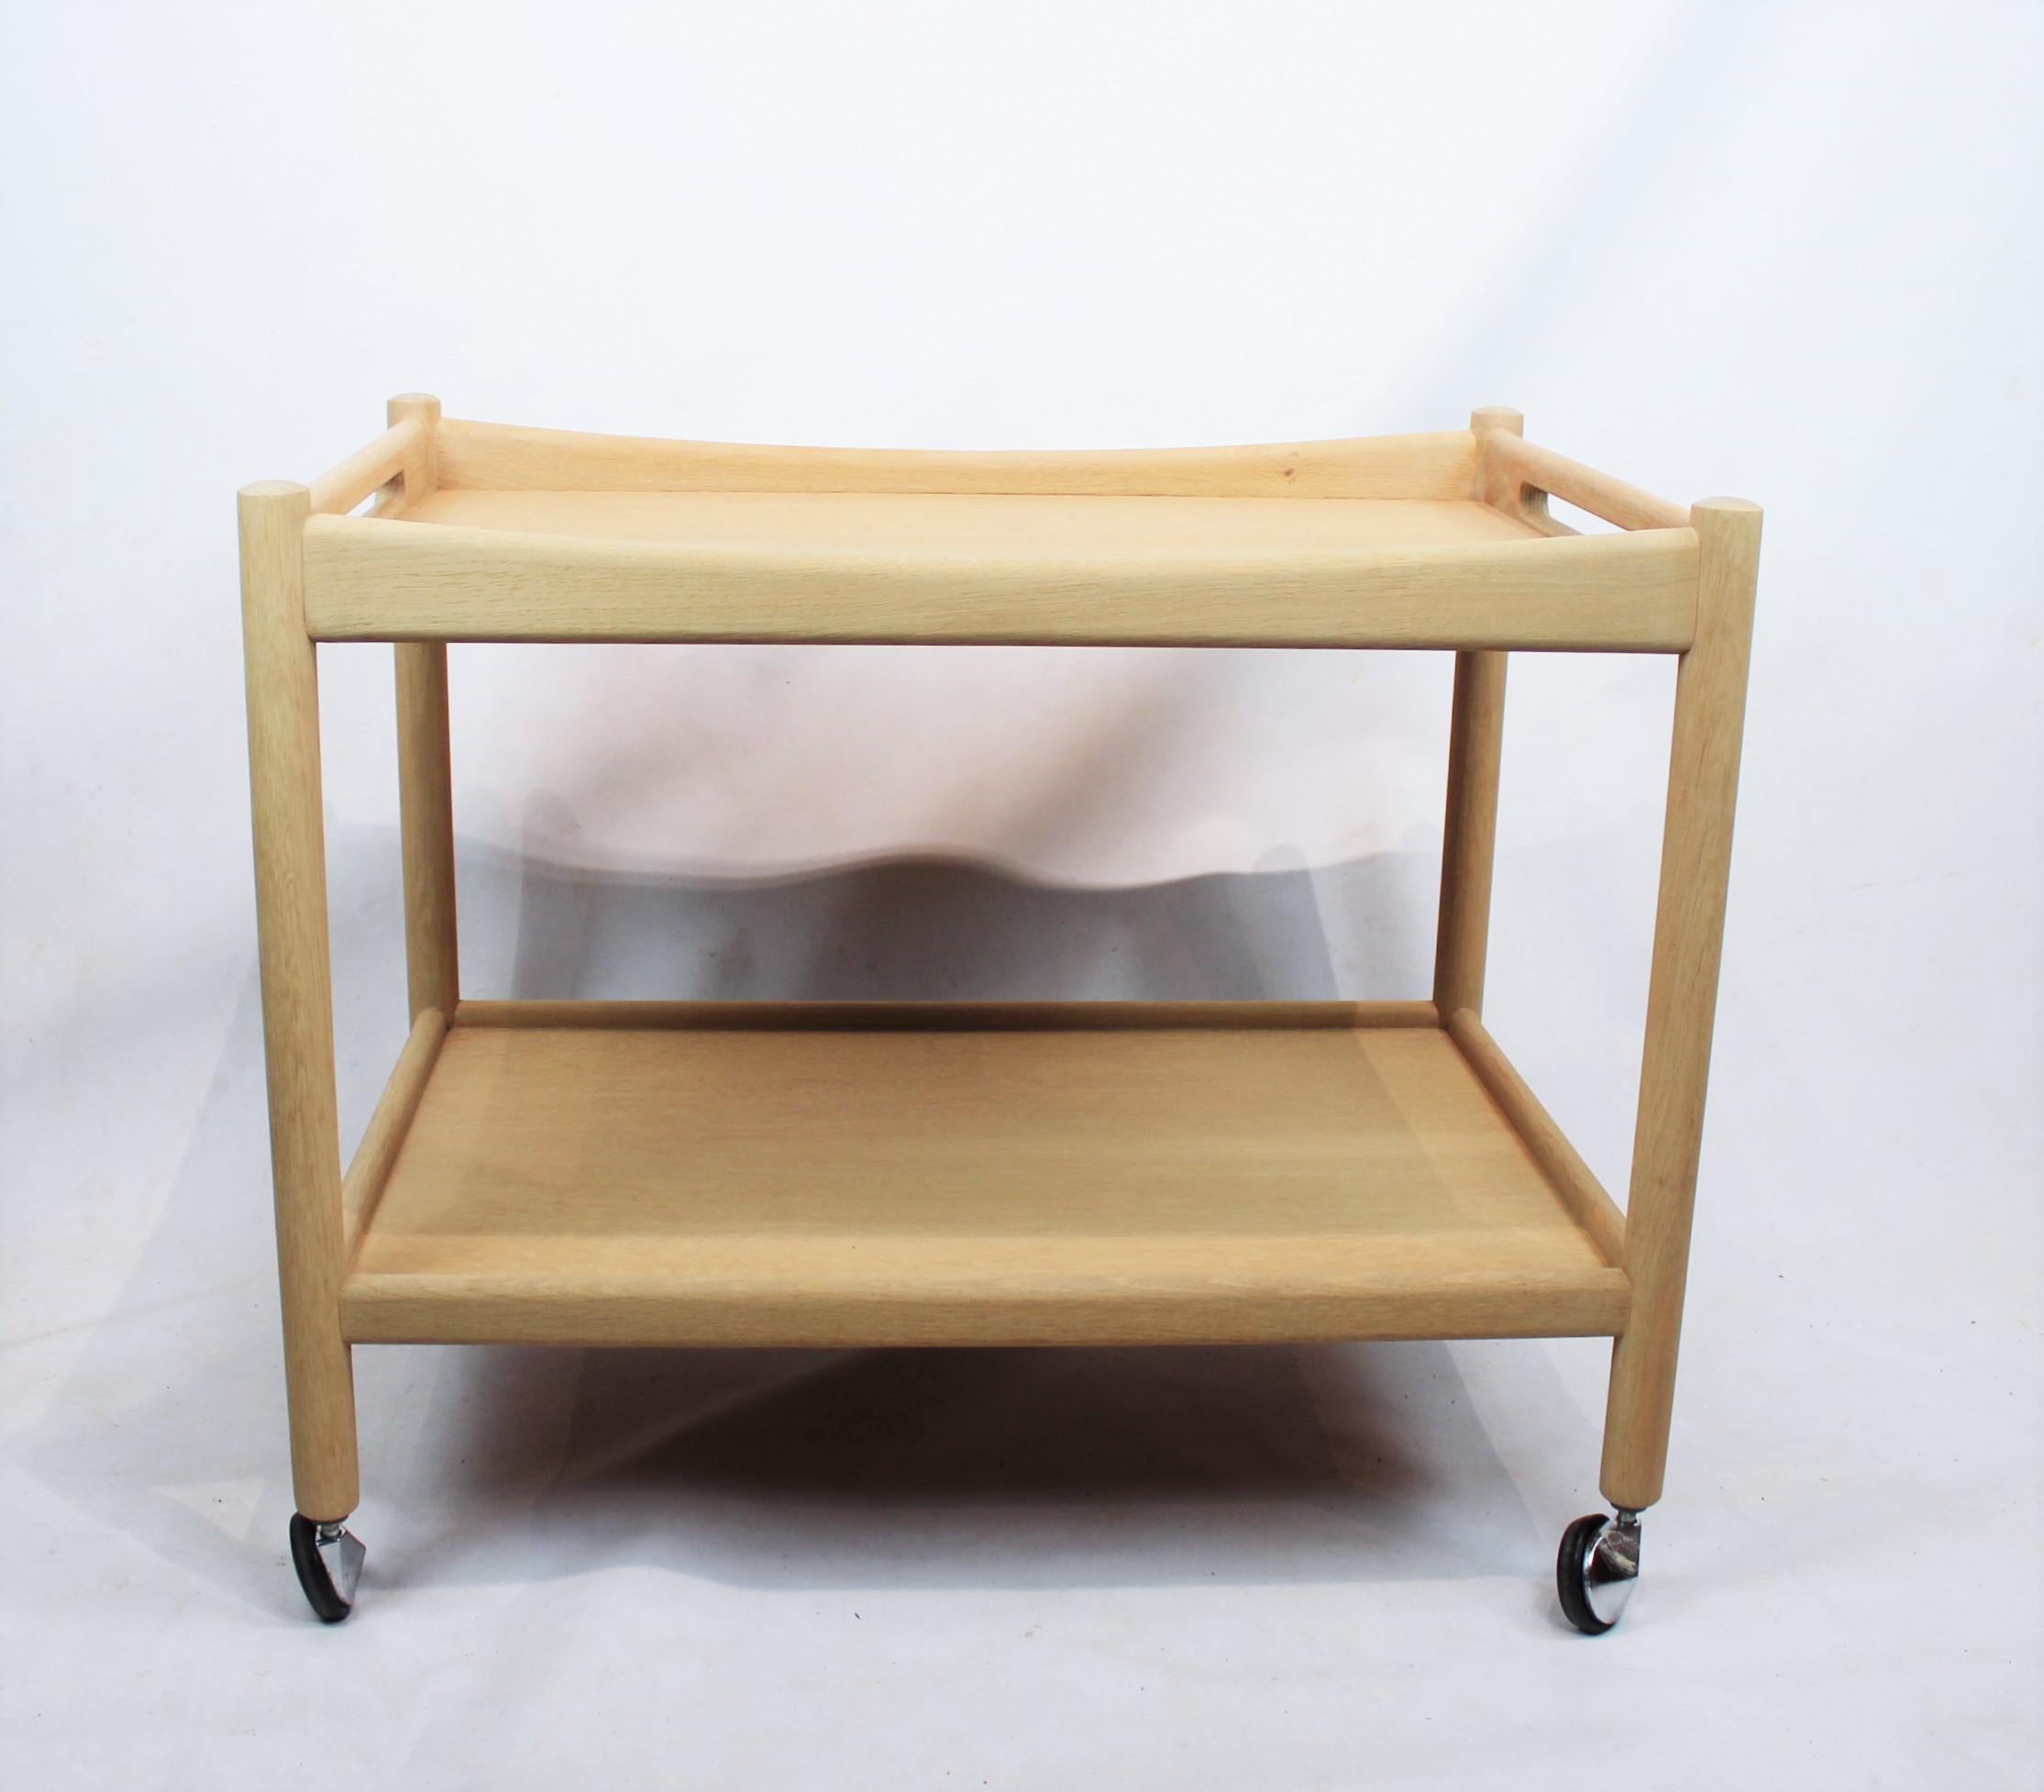 Trolley table of soap treated oak designed by Hans J. Wegner and manufactured by Andreas Tuck in the 1960s. The table is in great vintage condition.